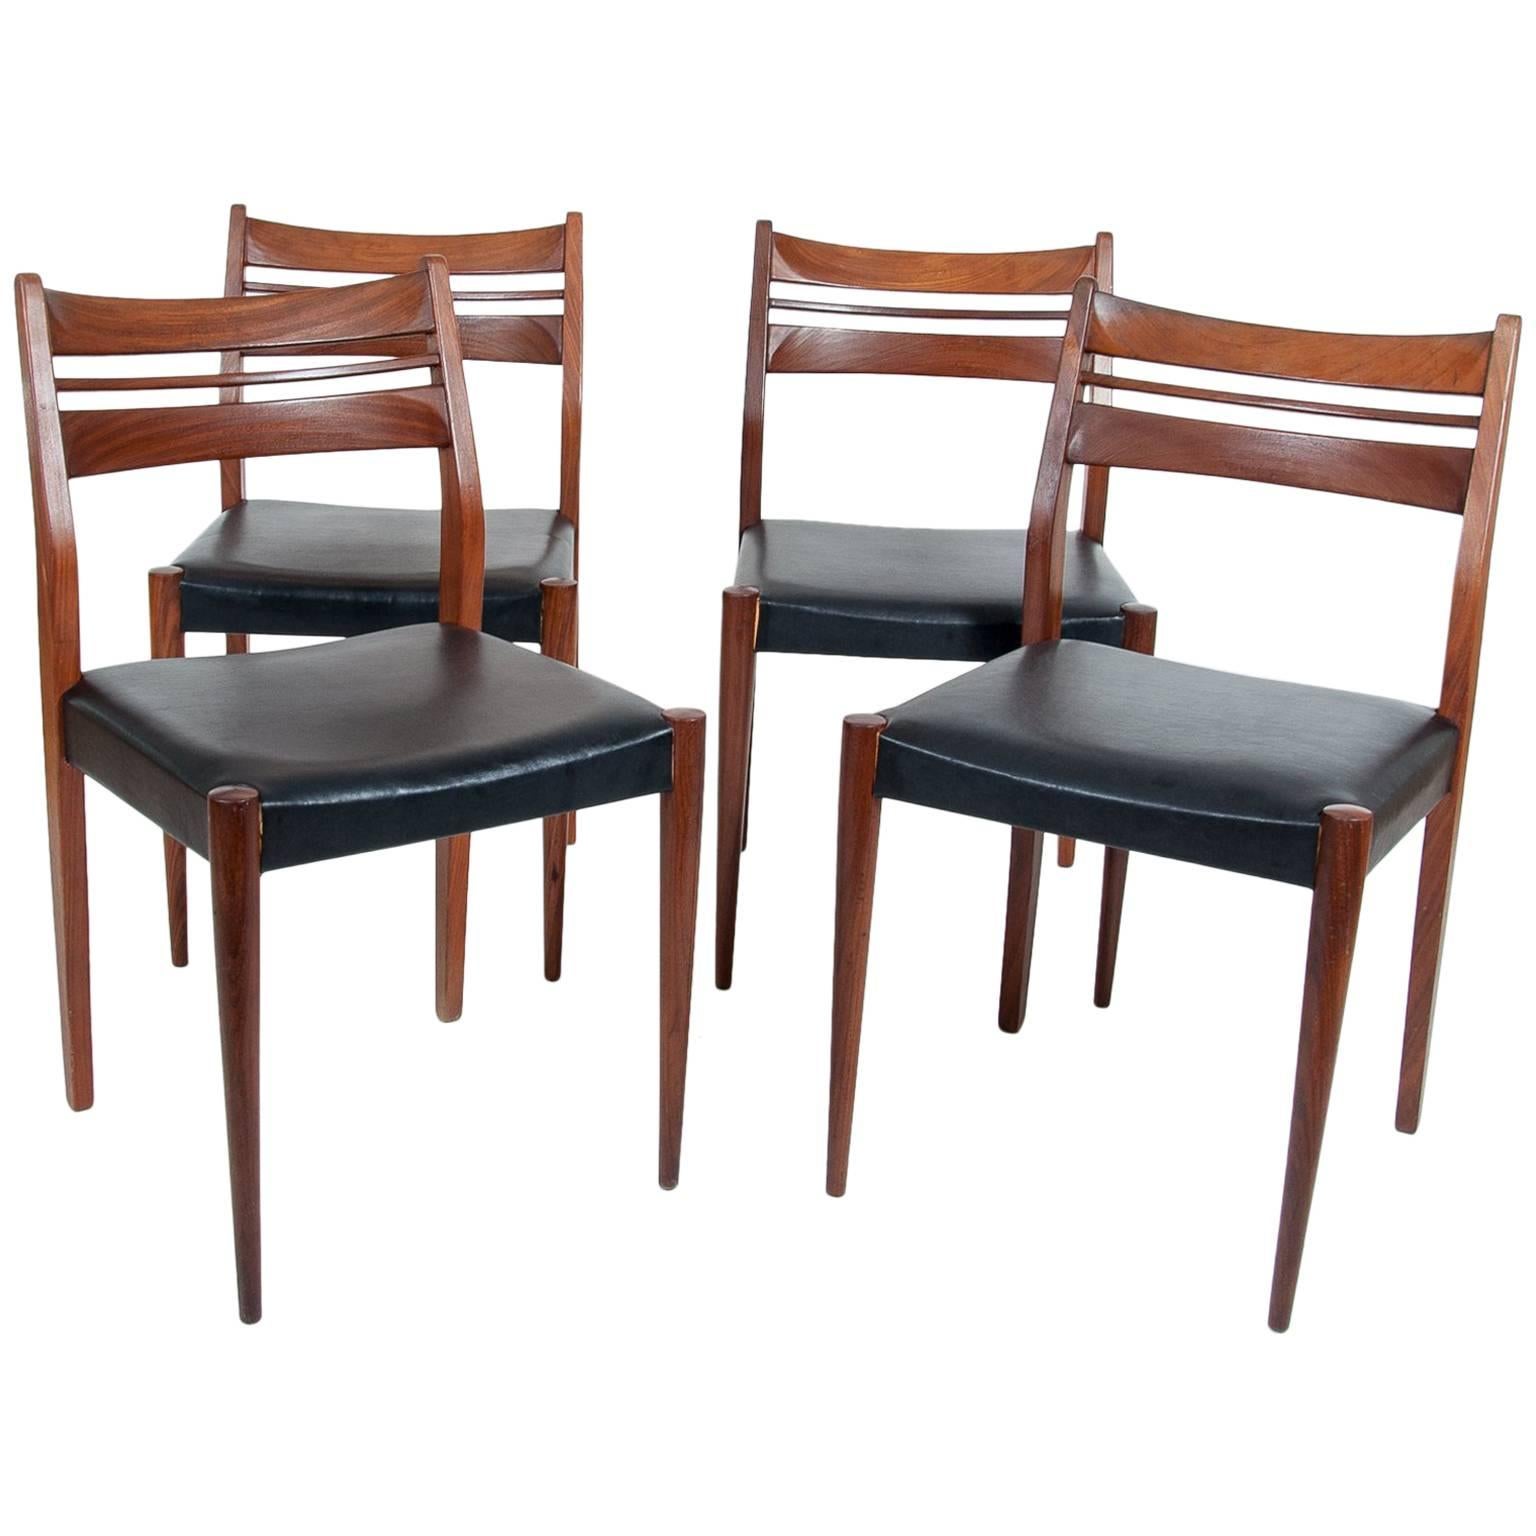 Set of Four Mid-Century Danish Design Dining Chairs by Arne Vodder, Denmark For Sale